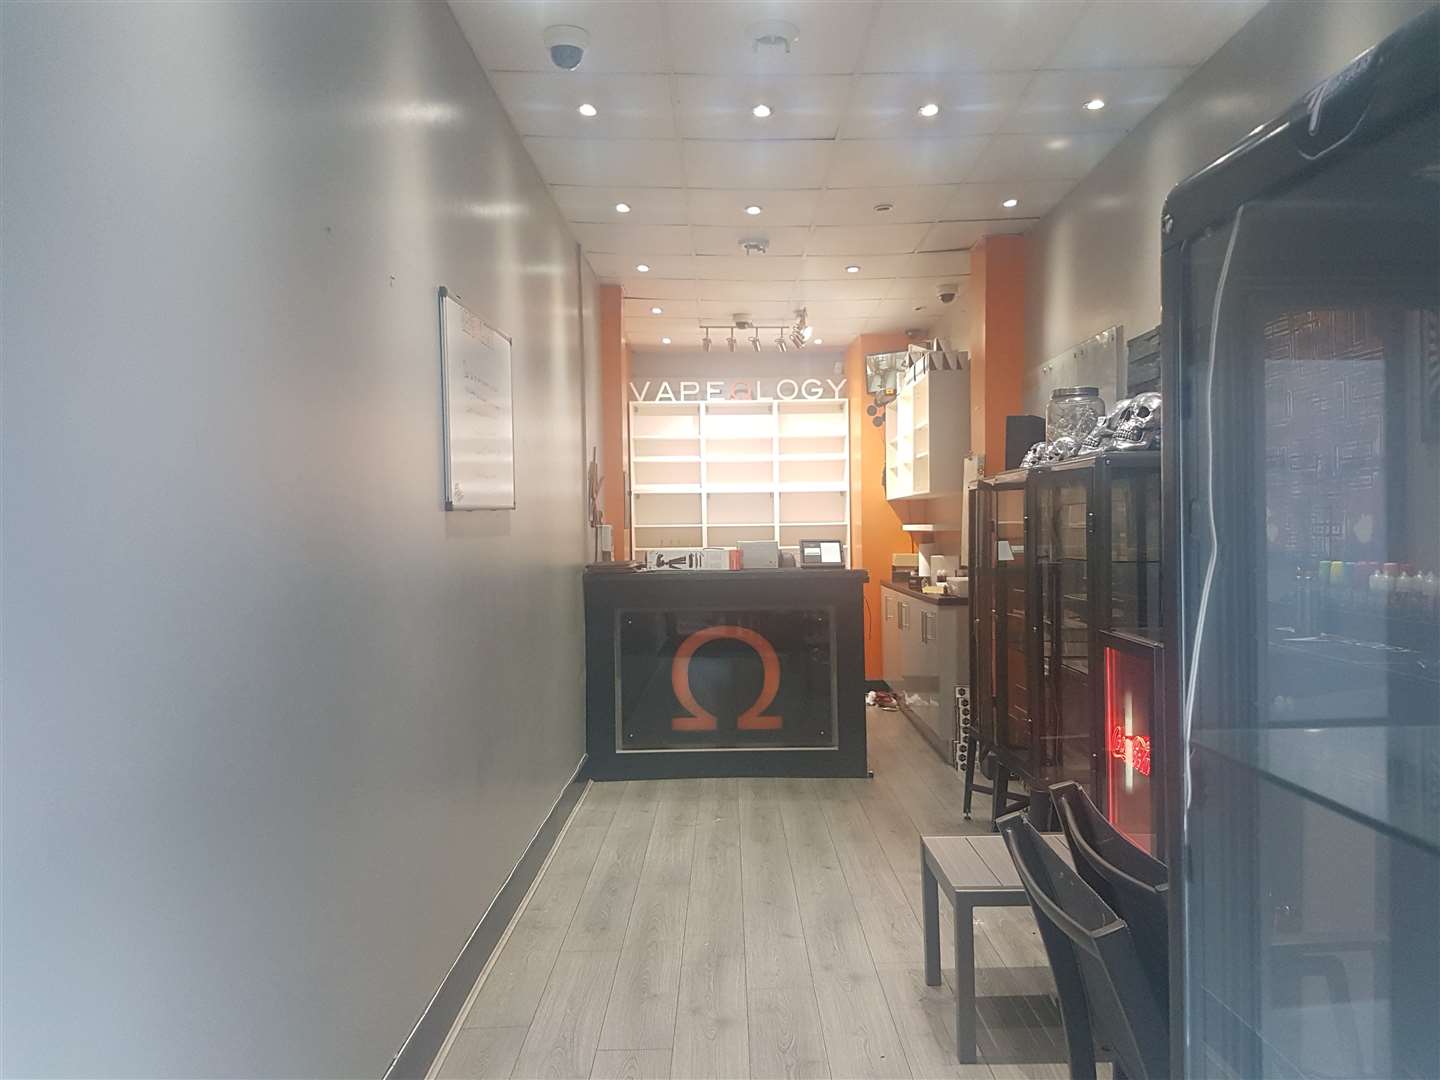 Vapeology's old unit shows how dramatically its floorspace has increased